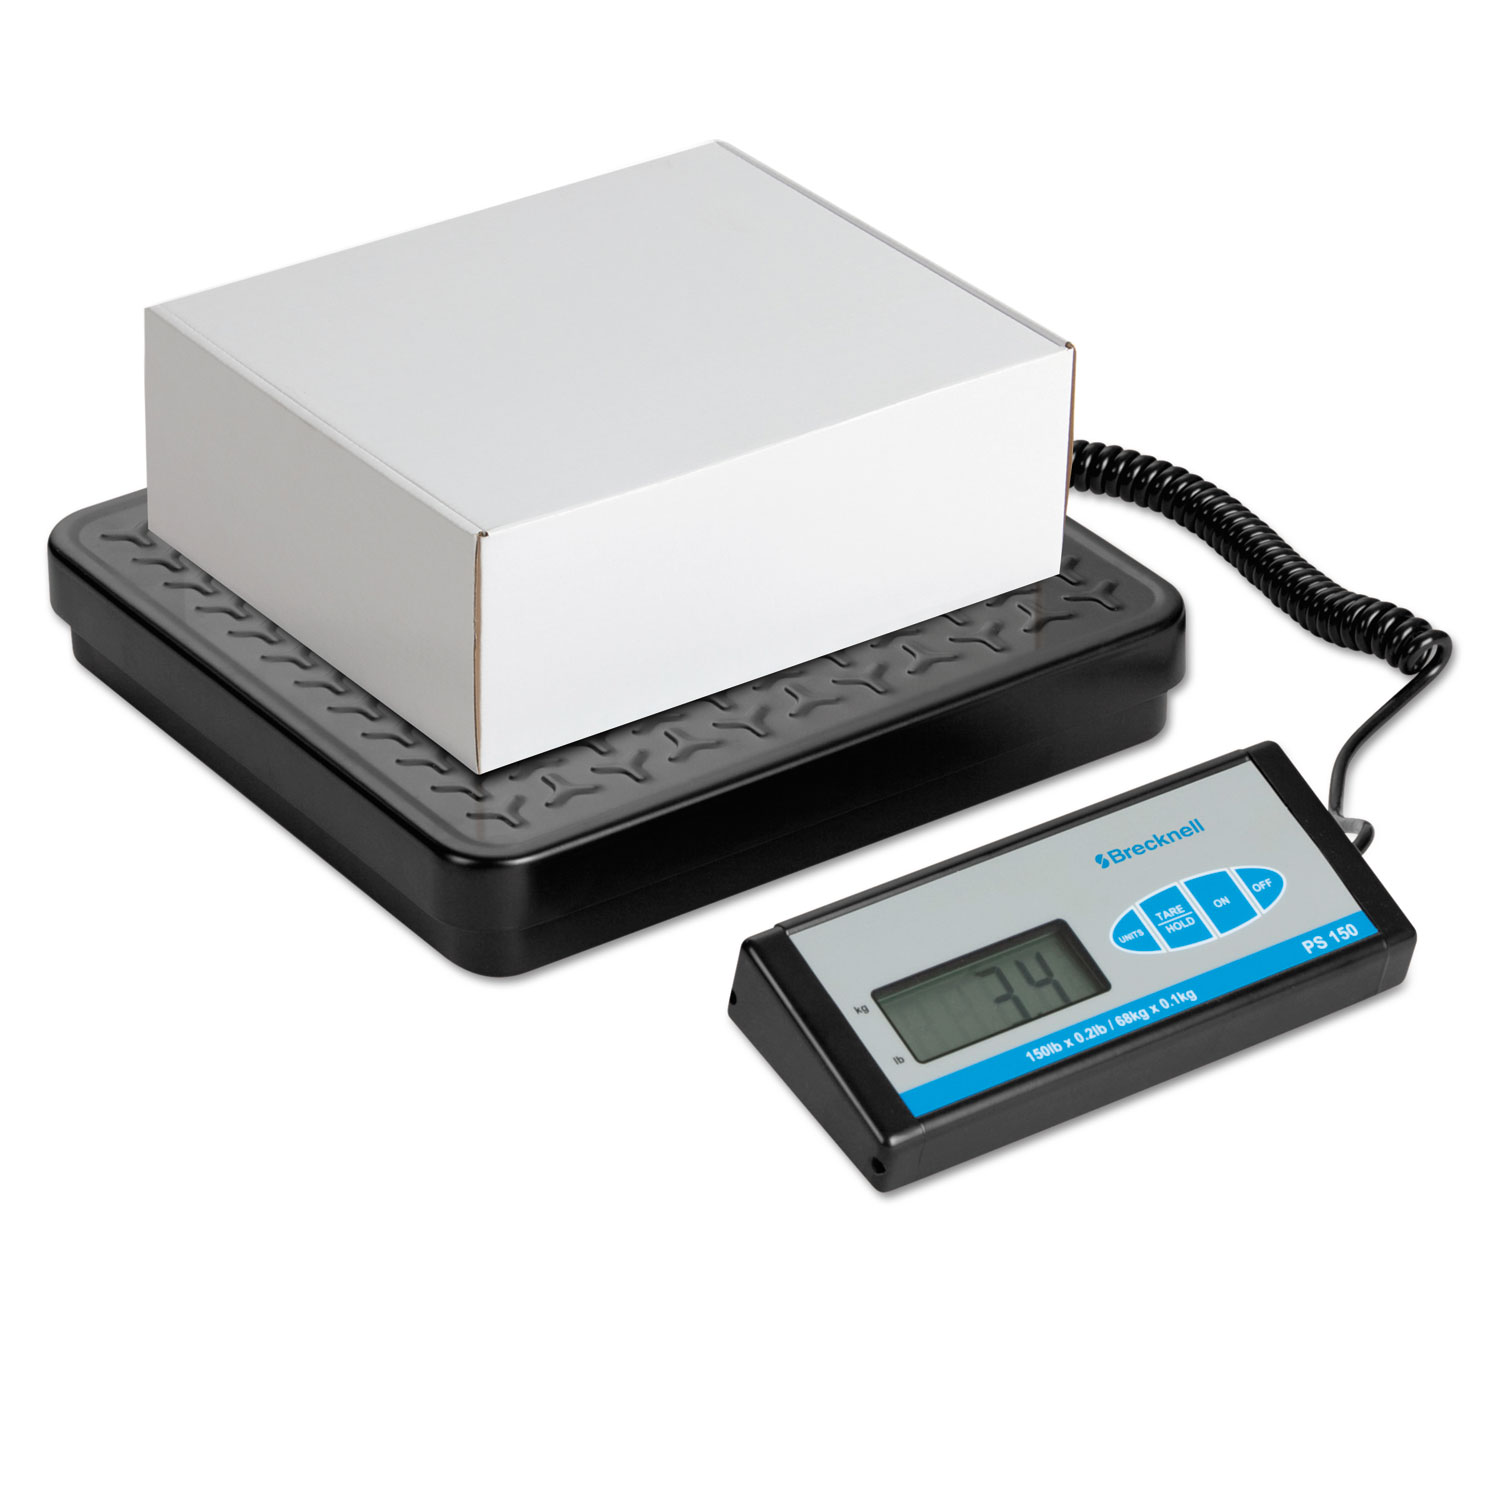  Brecknell PS400 Bench Scale with Remote Display, 400lb Capacity, 12 1/5 x 11 7/10 Platform (SBWPS400) 